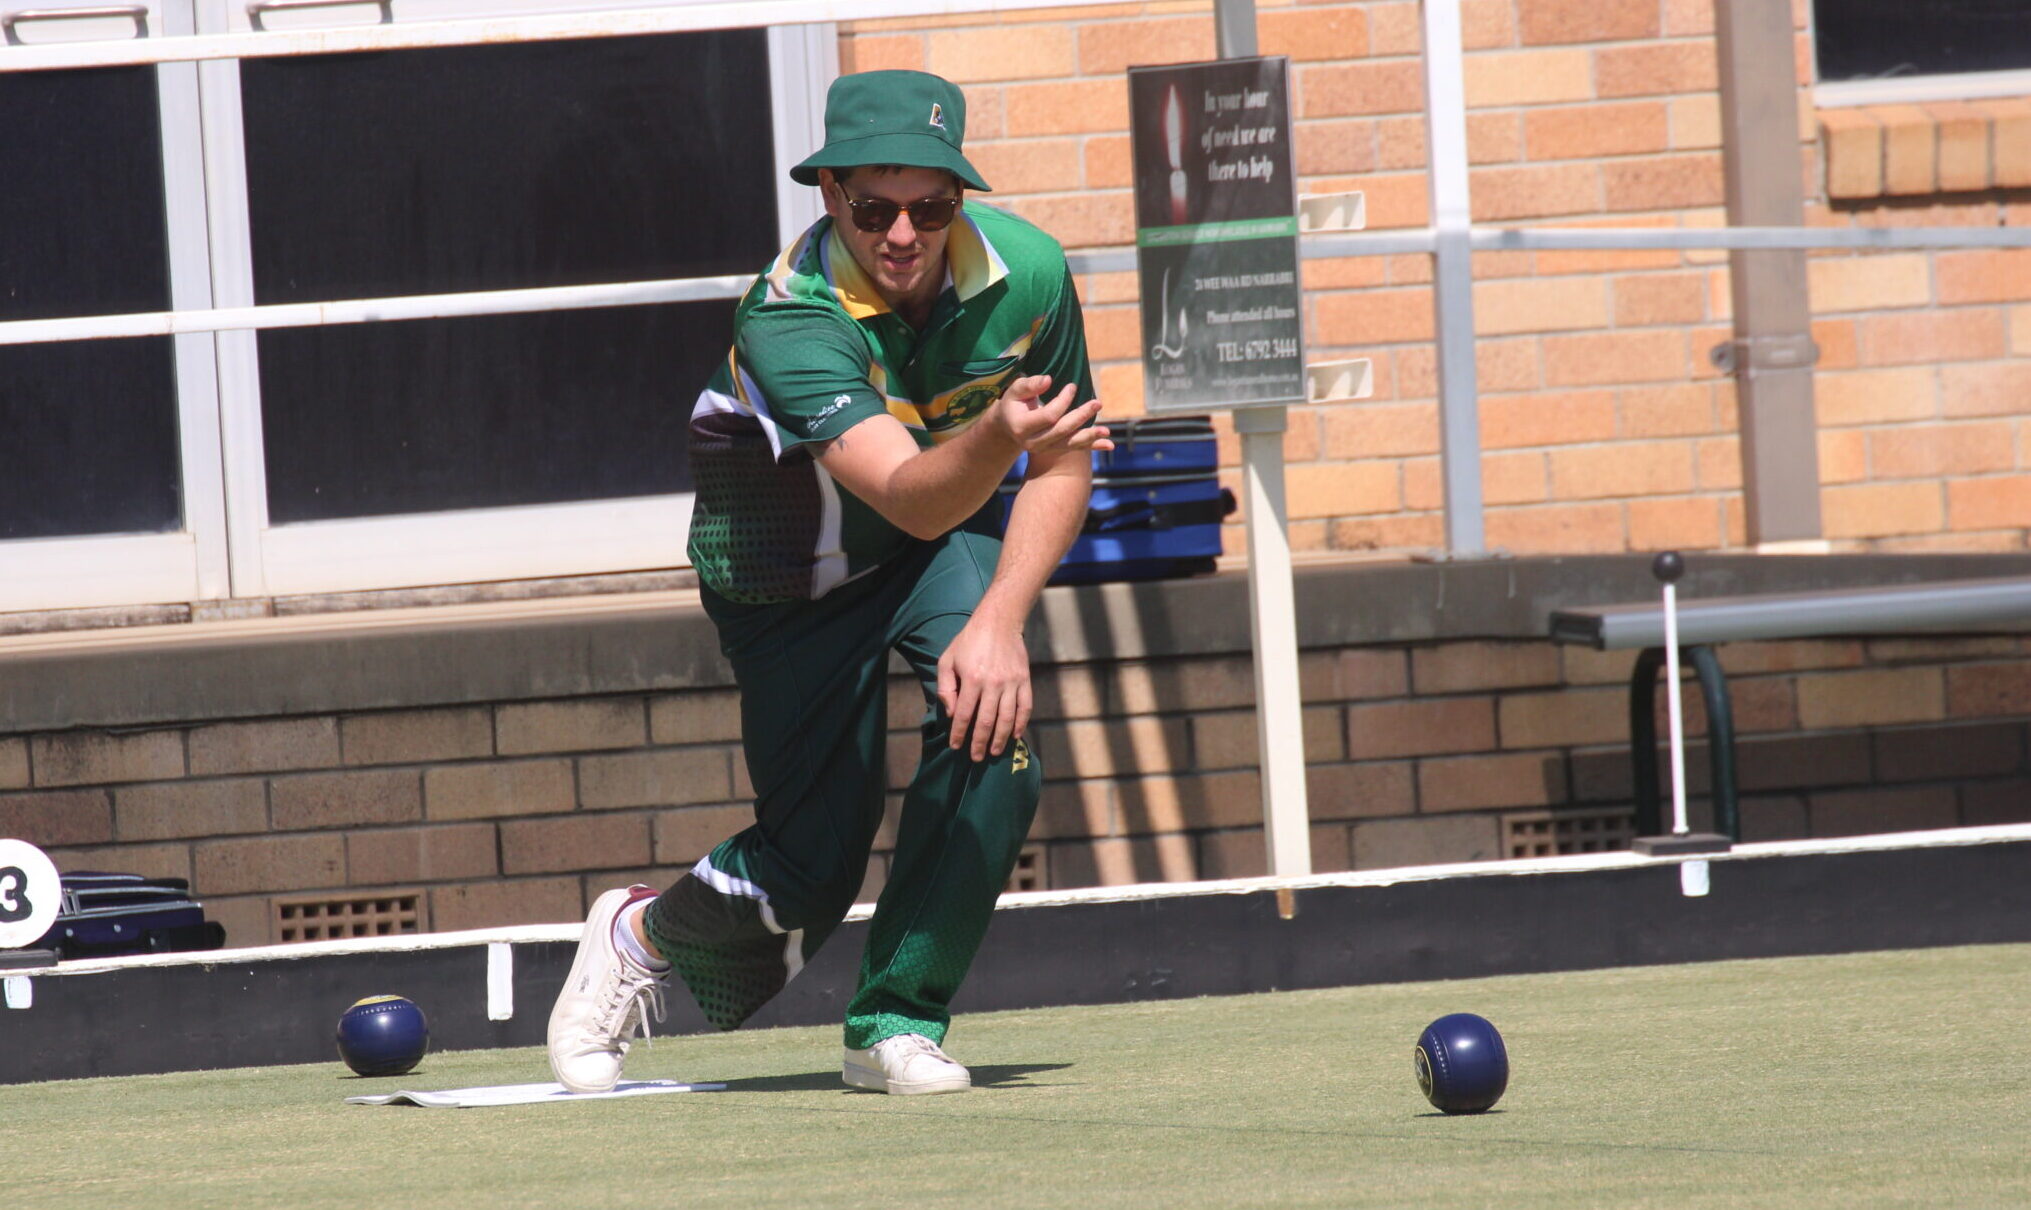 Wee Waa Bowling Club hosts four Consistency Singles matches across the weekend